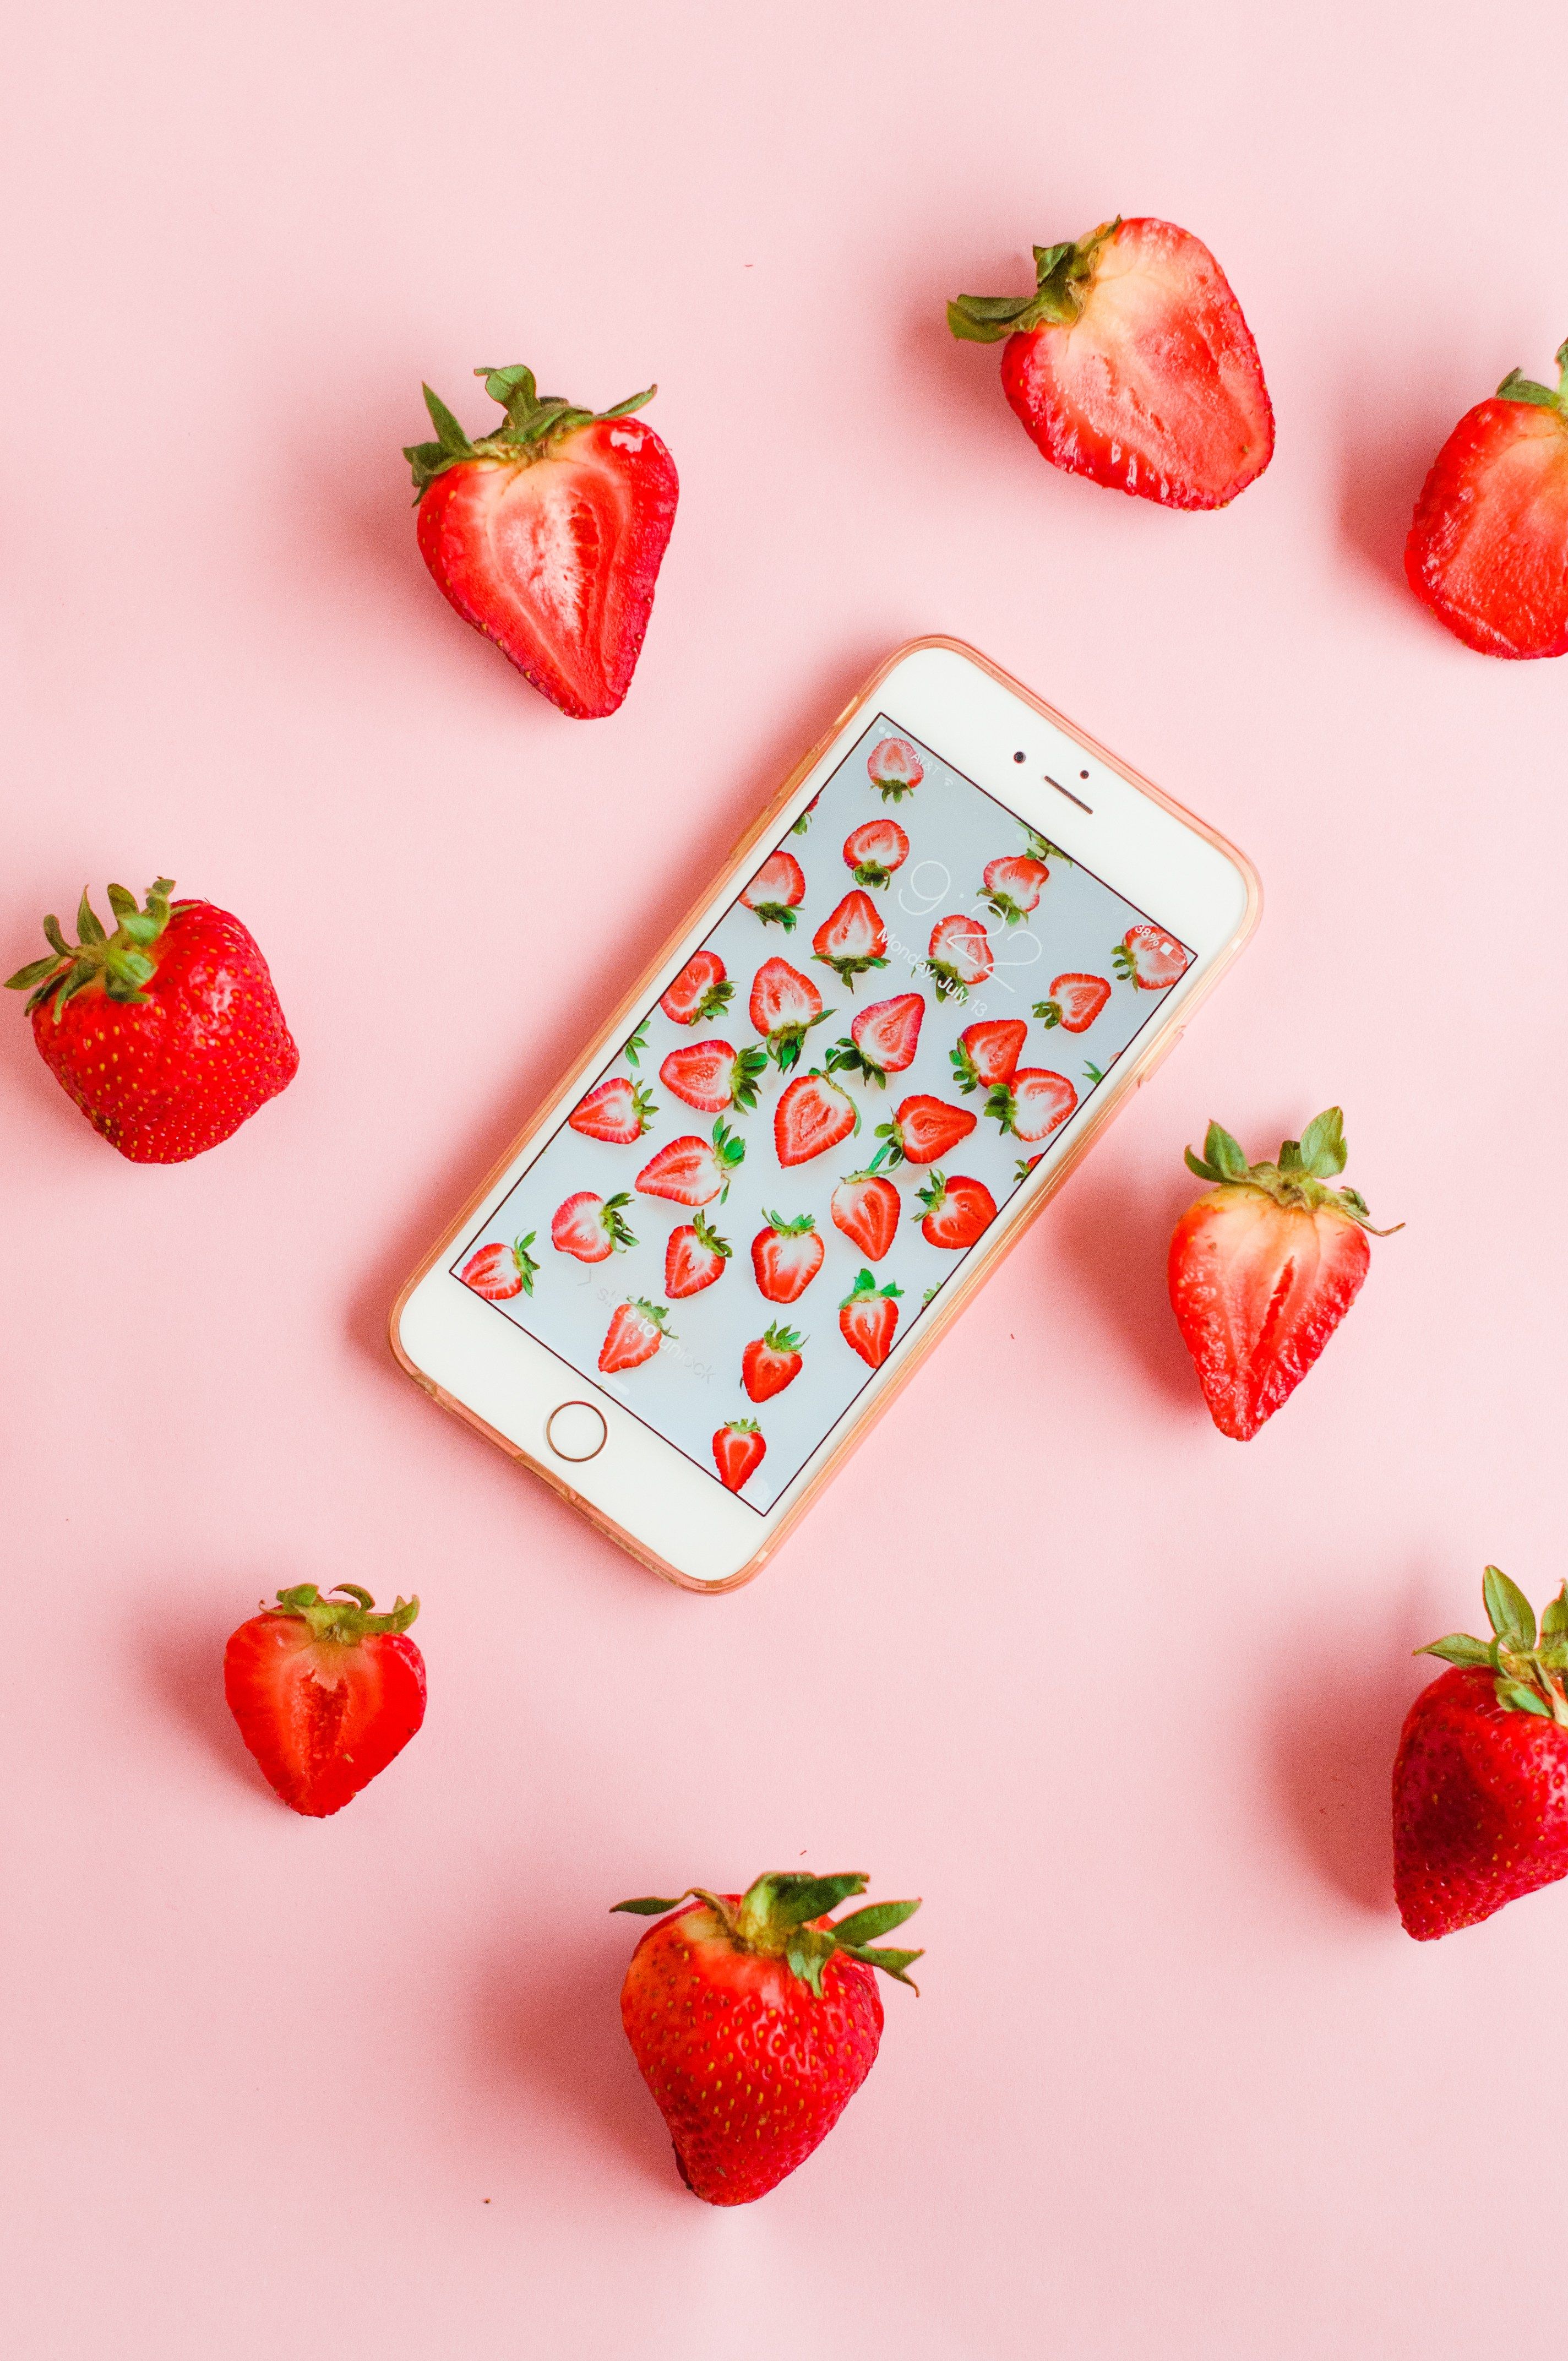 Printed Strawberry Wallpaper Download & A New Series. Wallpaper